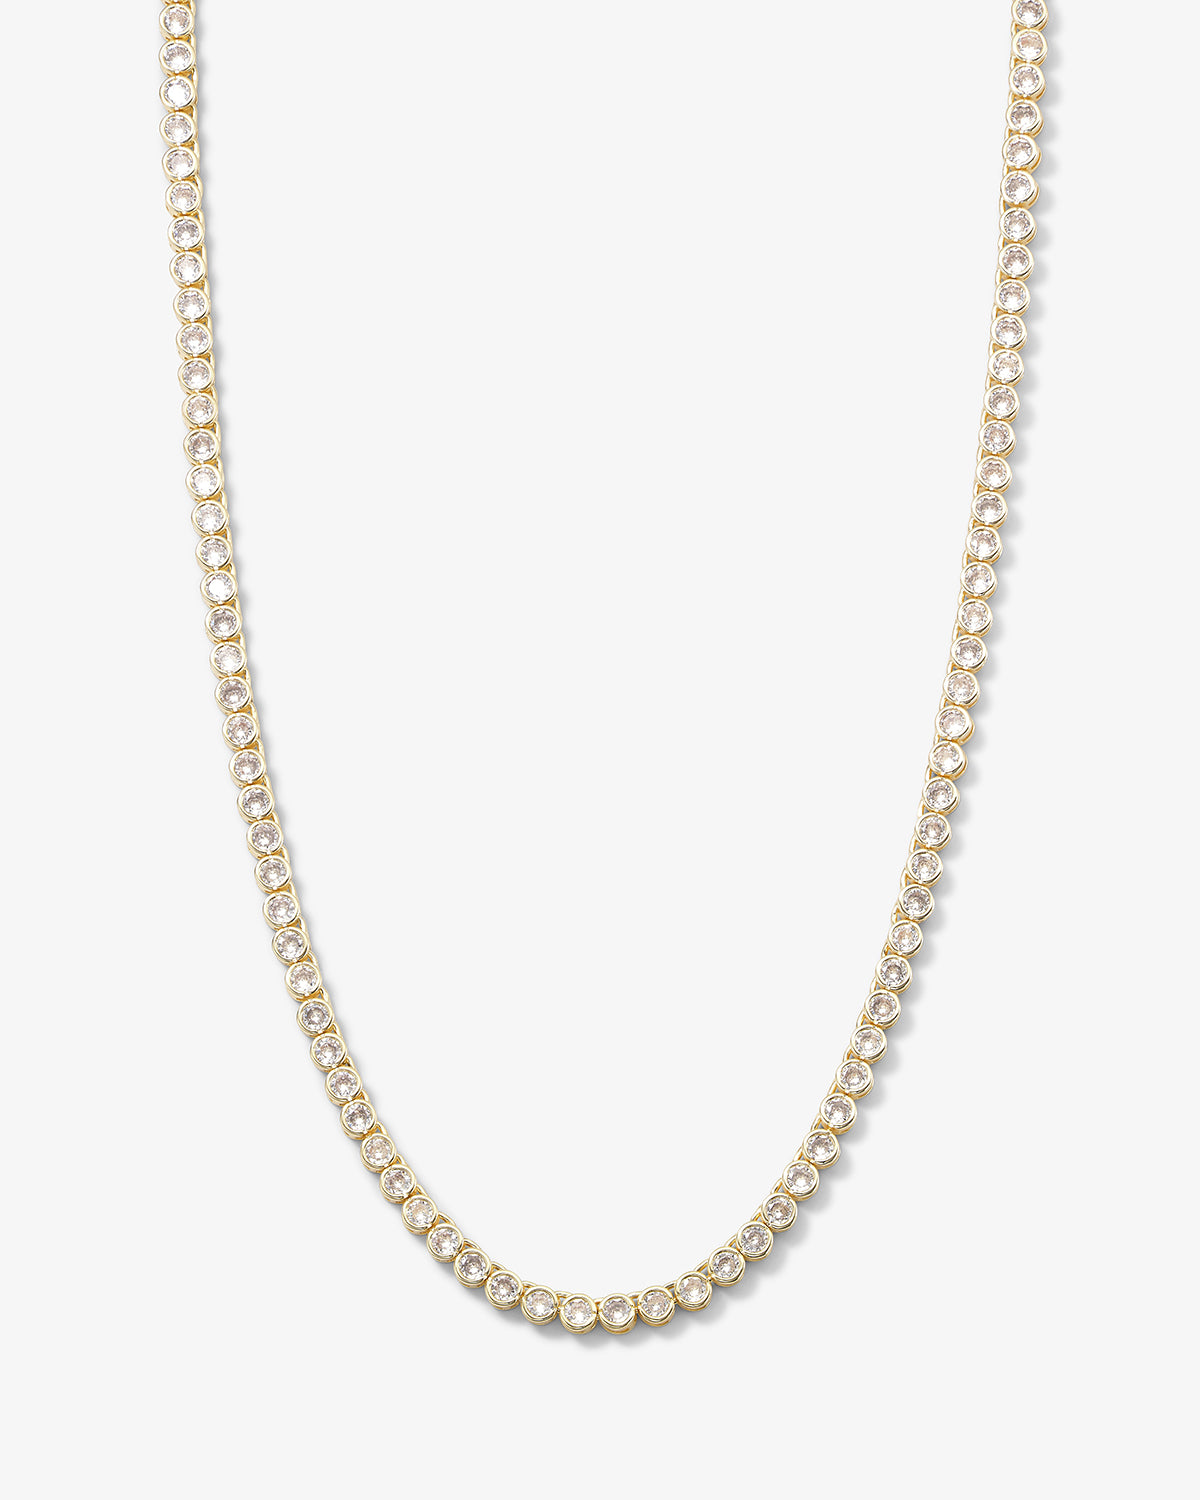 20 Unique Things Under $200 at Tiffany & Co. — Michele, One L